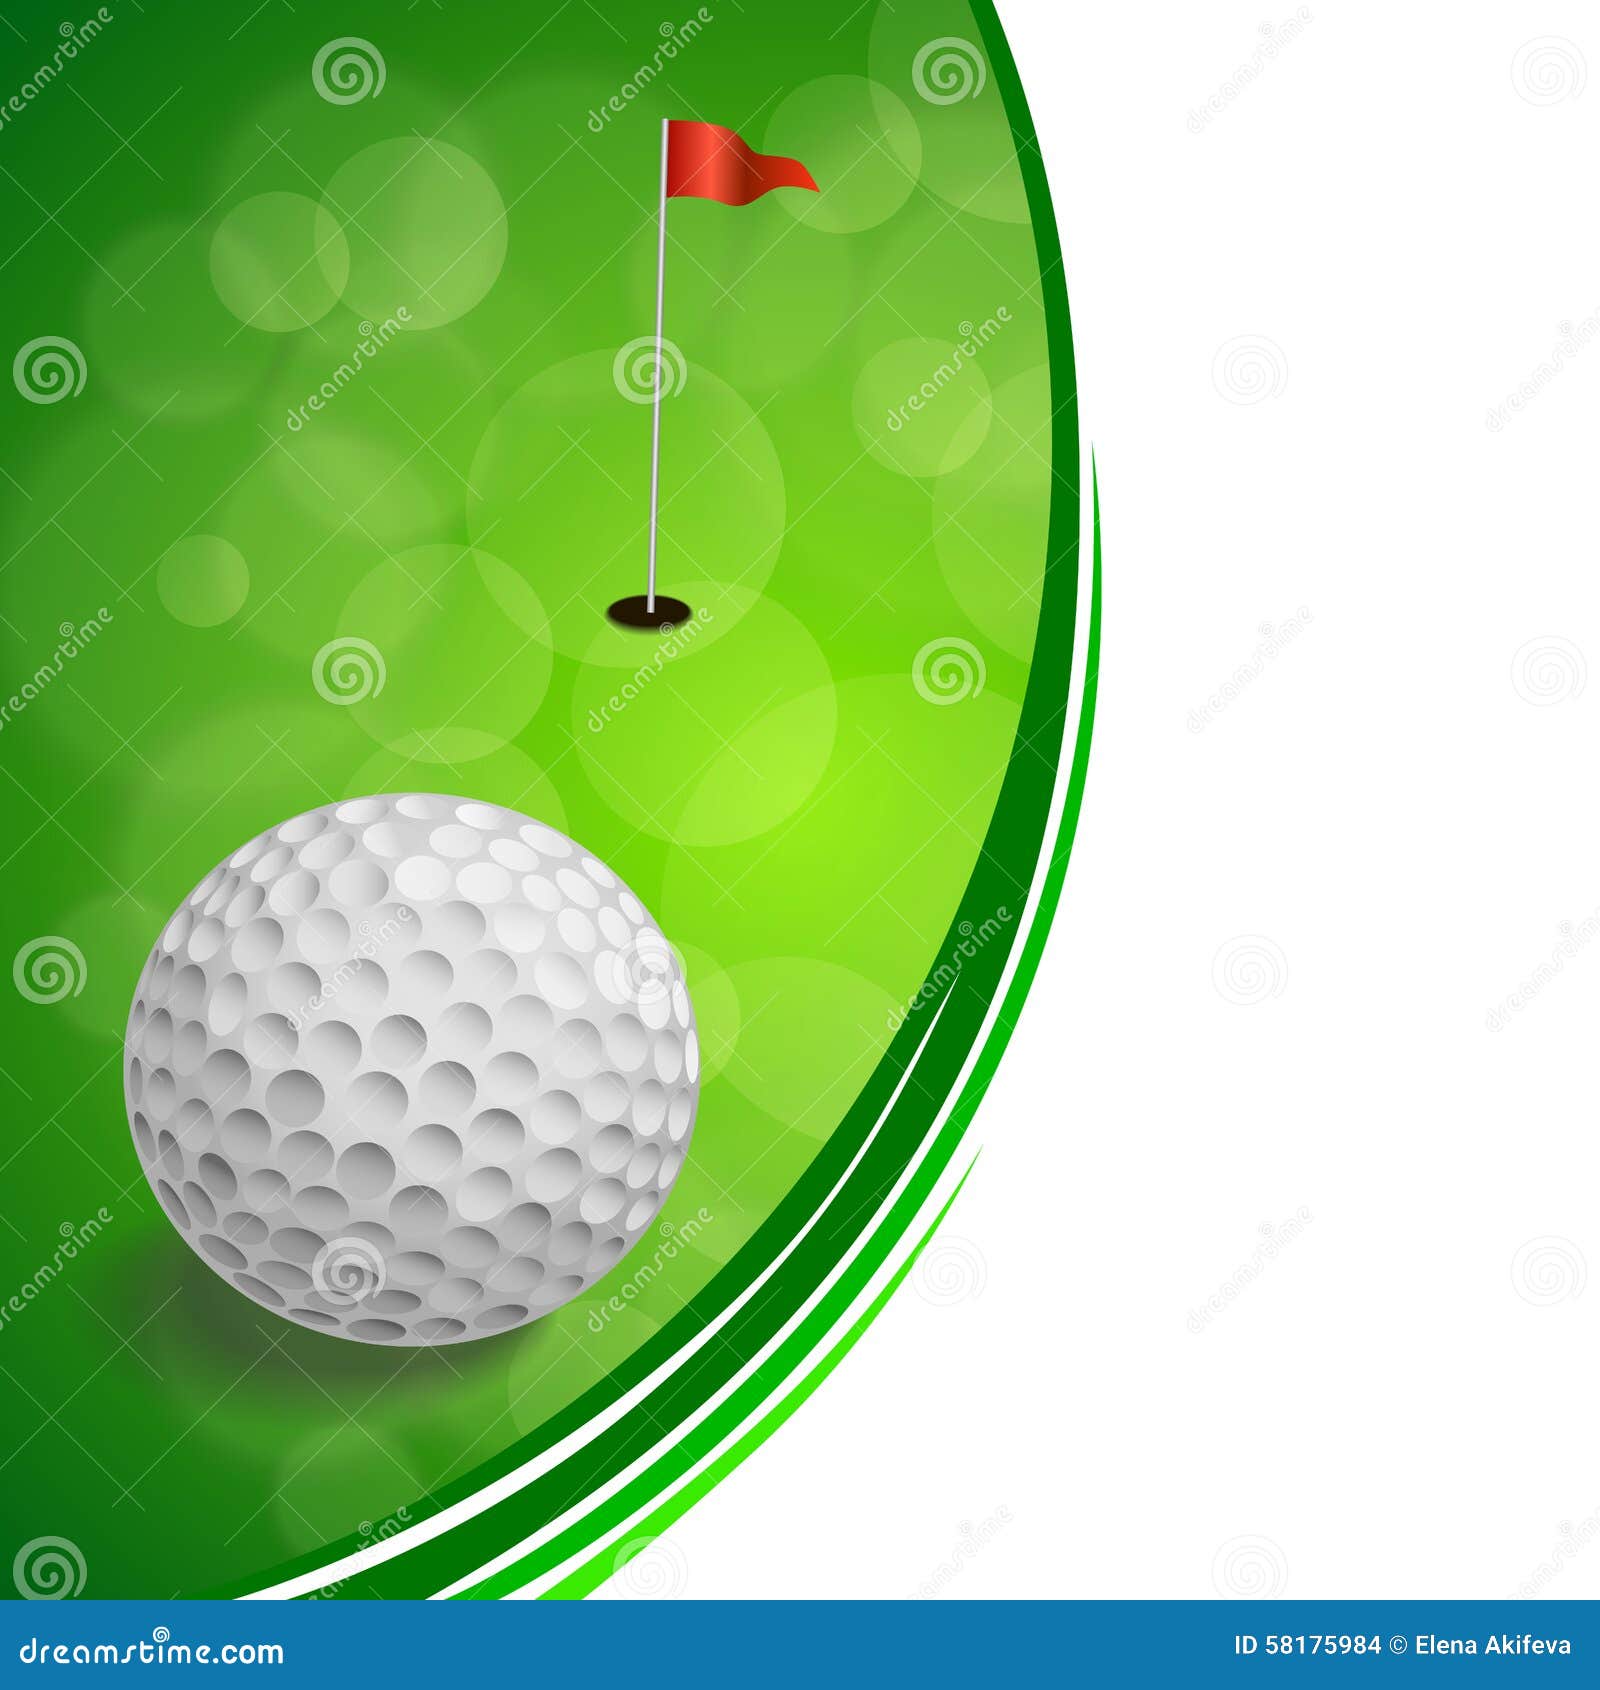 Background Abstract Golf Sport Green Red Flag White Ball Frame ...